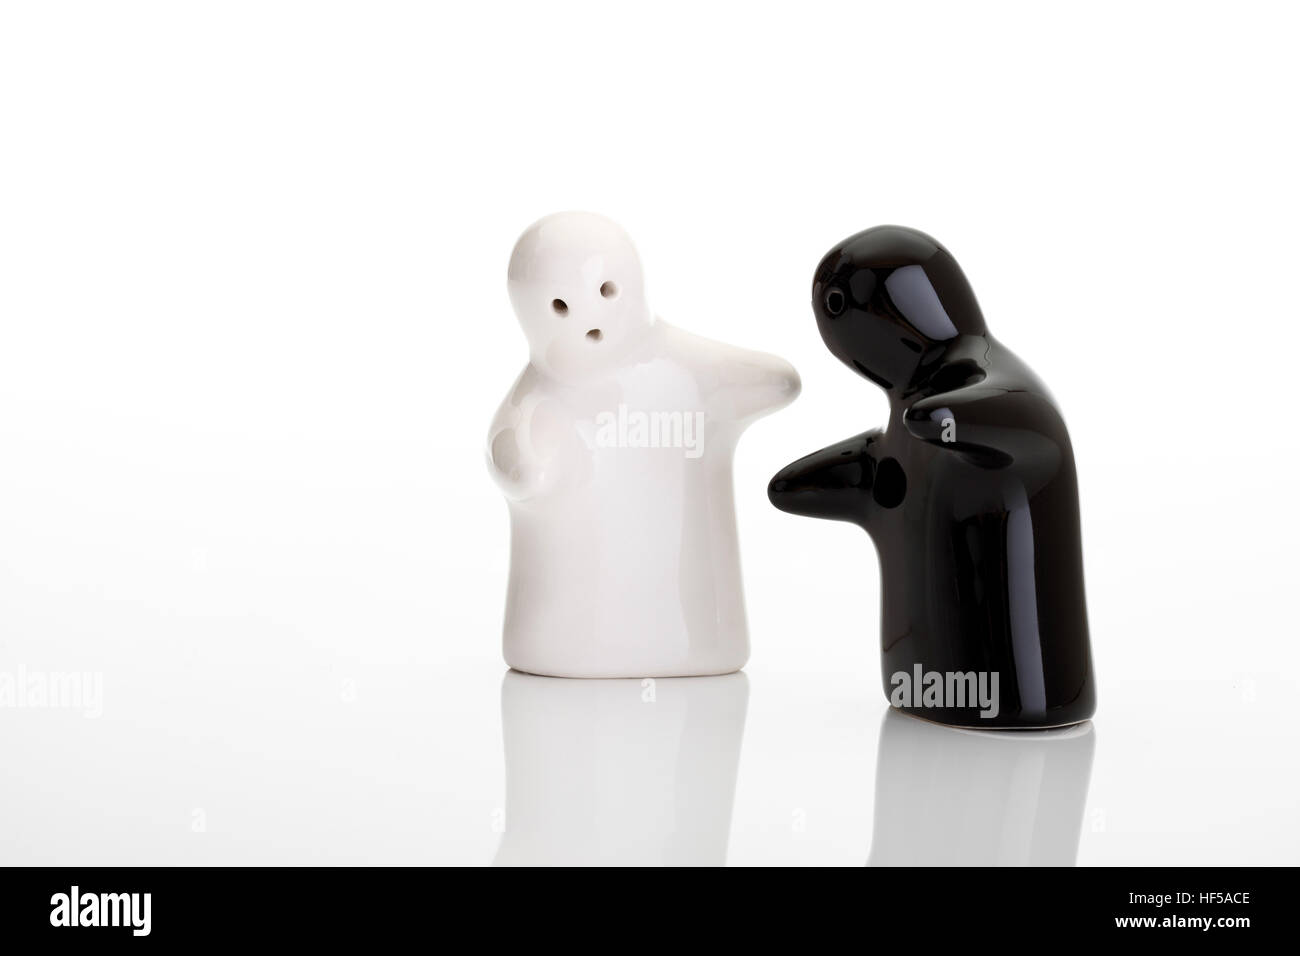 The encounter - symbolic picture - ghost salt and pepper shakers Stock Photo